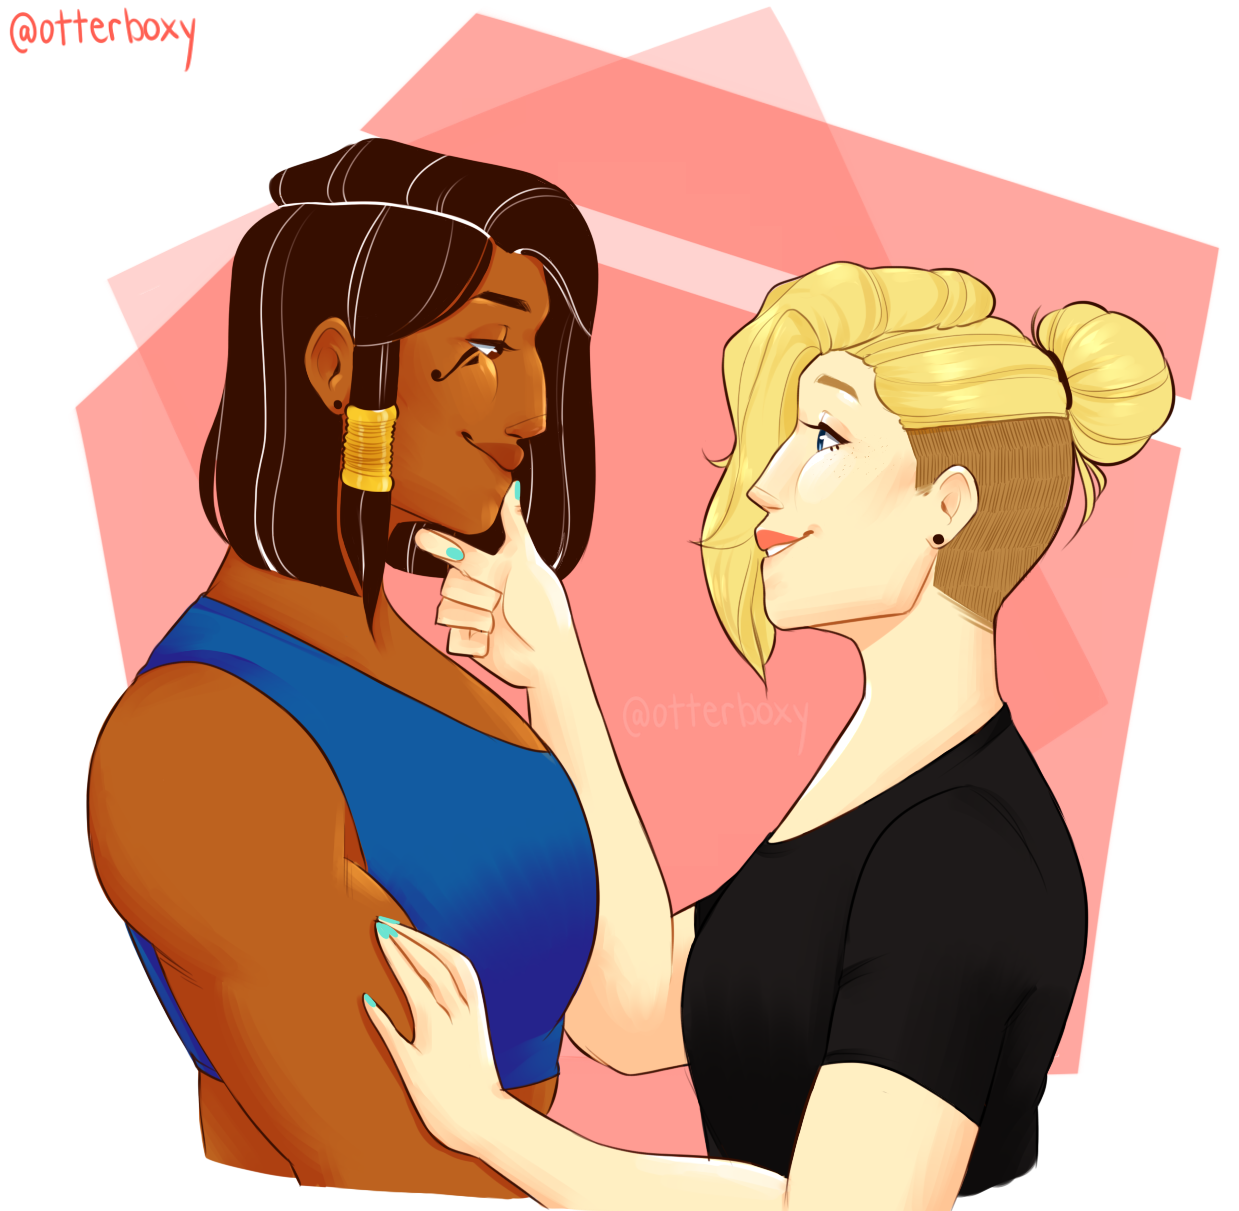 otterboxy:
“ “do you need a second opinion? // sorry but i need to jet
”
@chromesaurus requested pharmercy and an anon asked for ‘just some cute lesbians’!!! so……. here are some cute lesbians
”